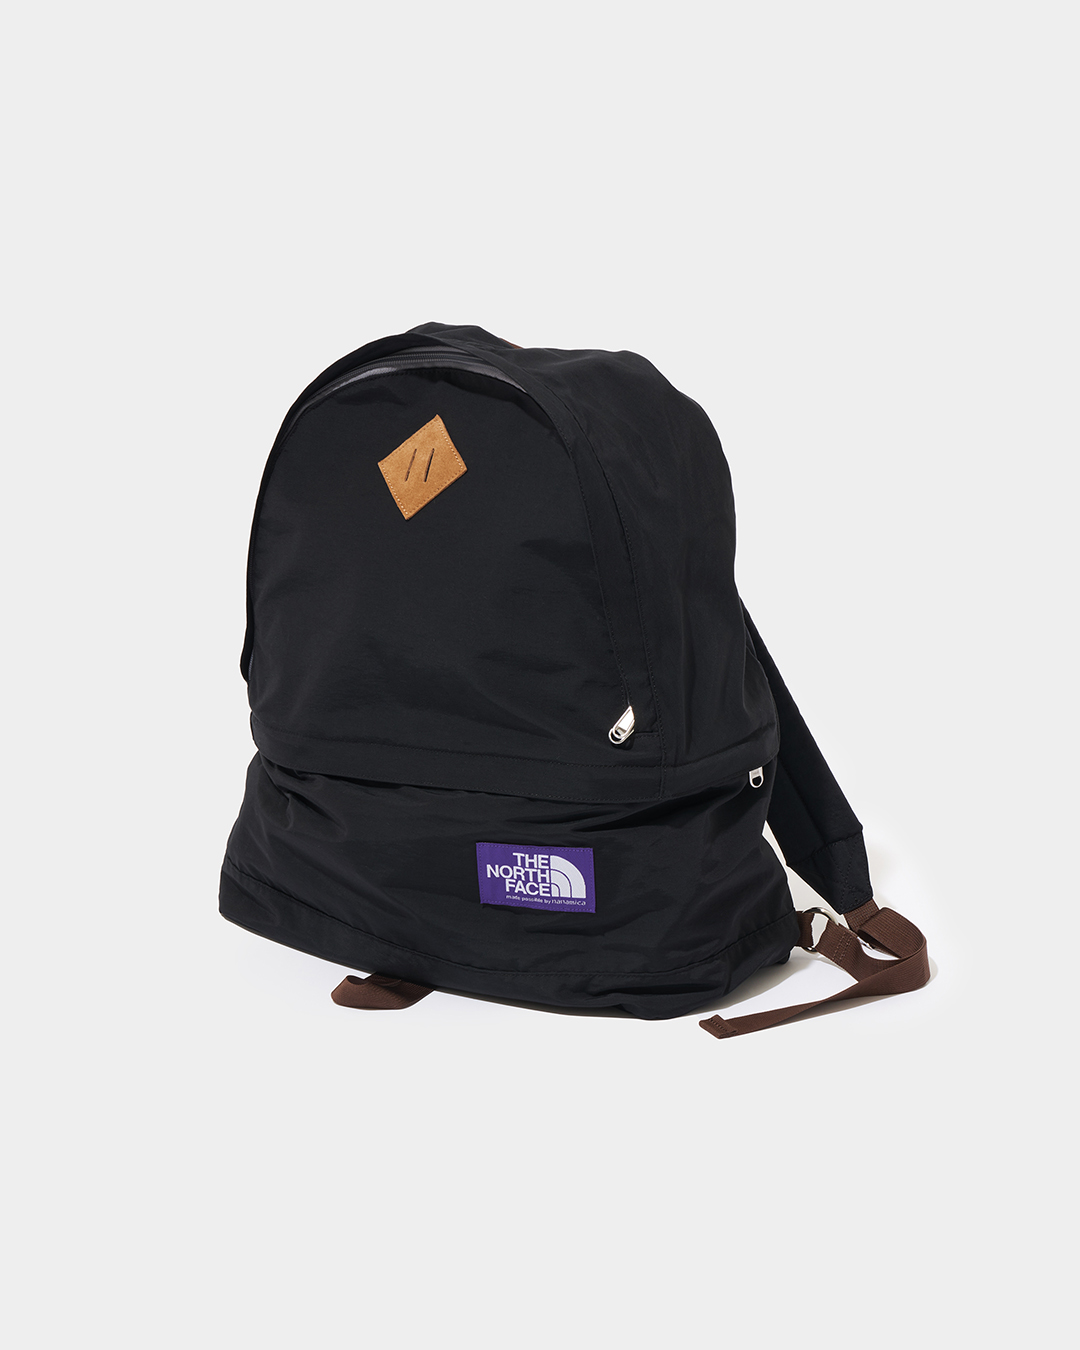 nanamica / THE NORTH FACE PURPLE LABEL / Featured Product vol.22